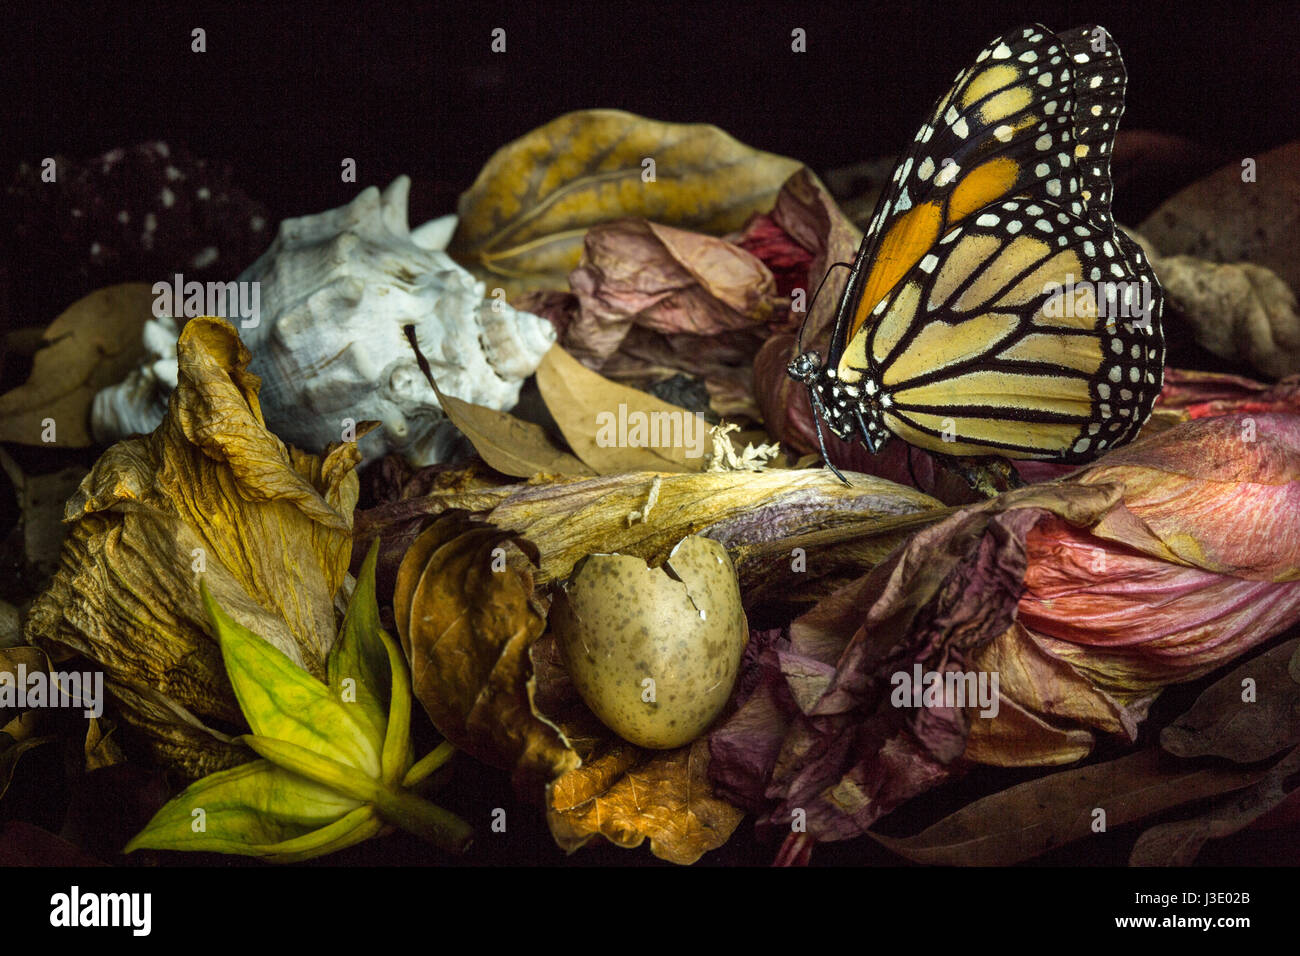 Dried flowers and monarch butterfly still life Stock Photo